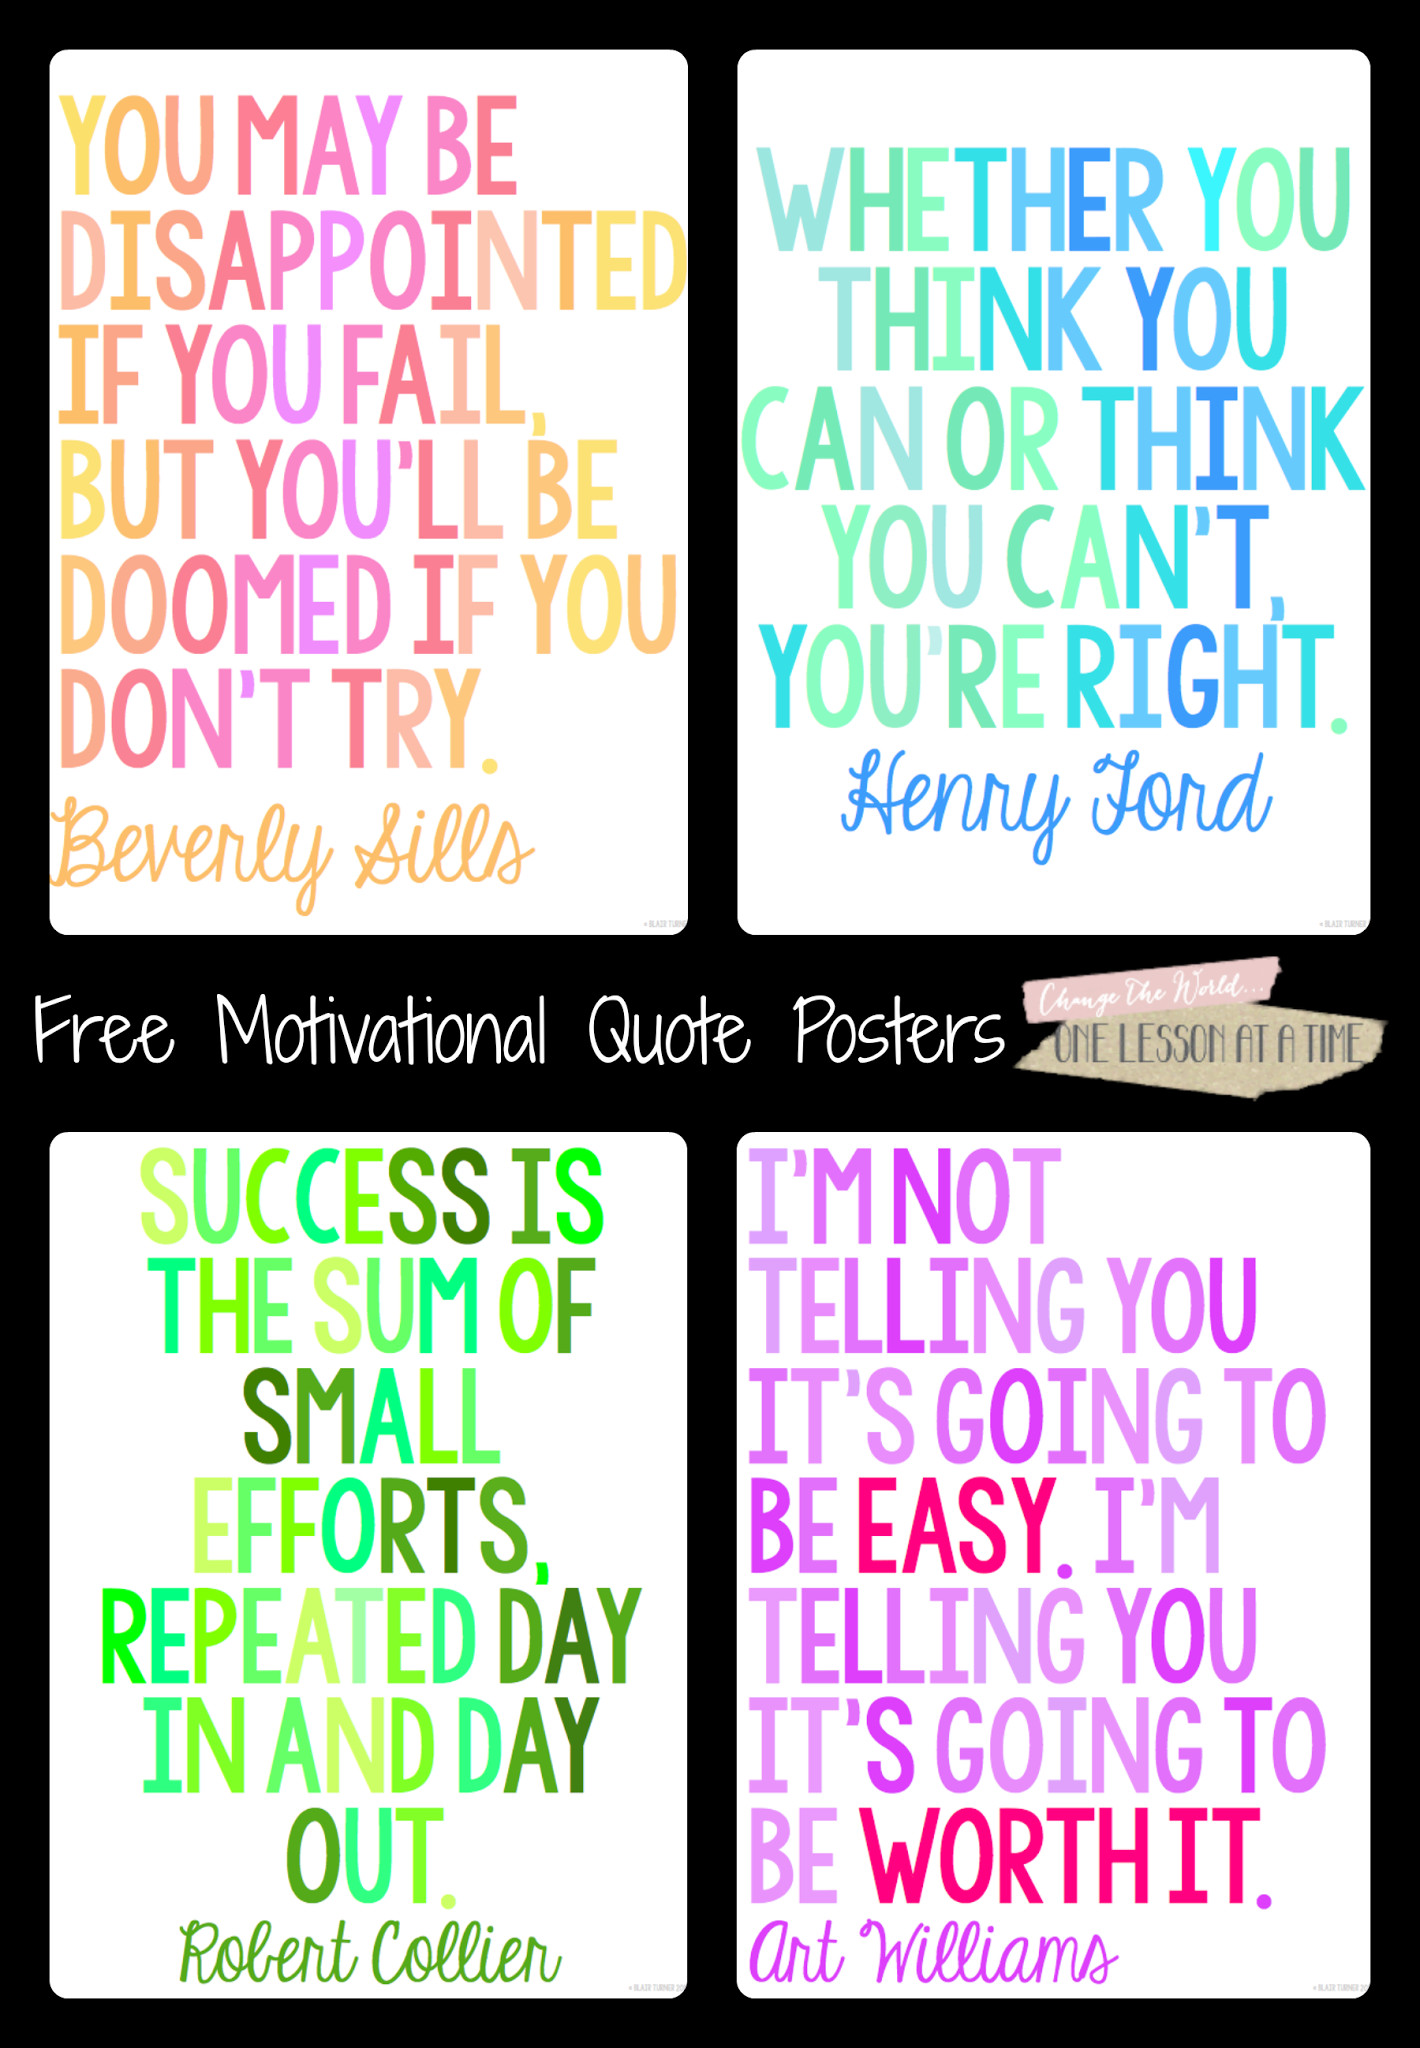 Motivational Testing Quotes
 Motivational Quotes for State Testing Free Posters